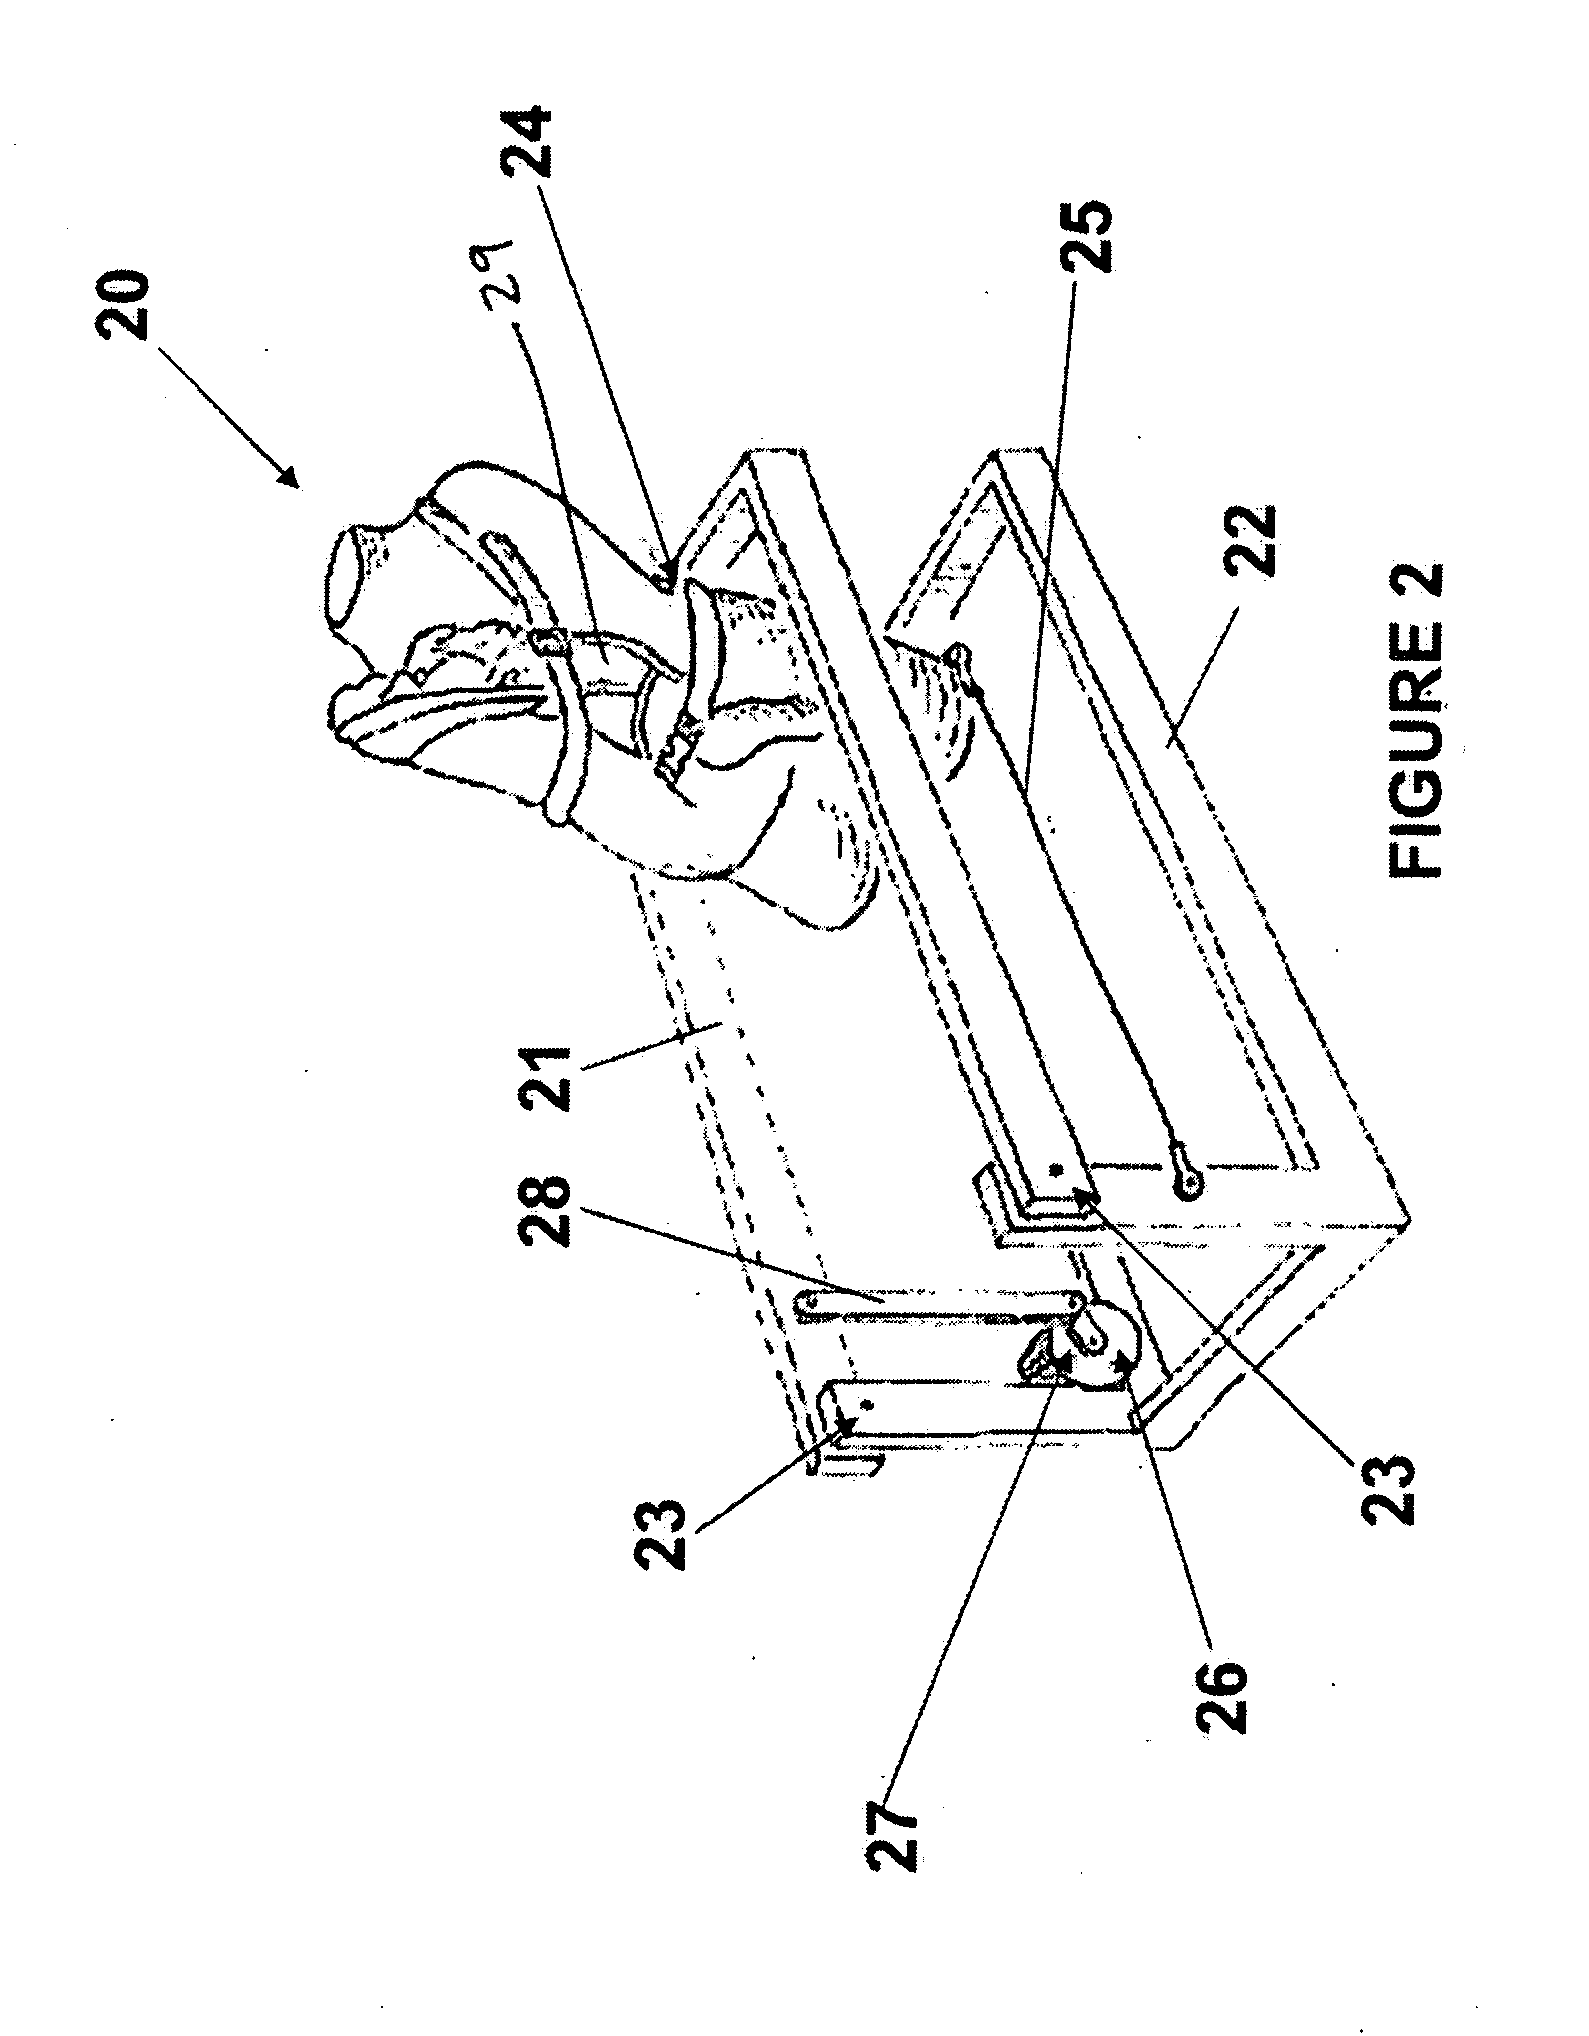 Infant soothing device and method